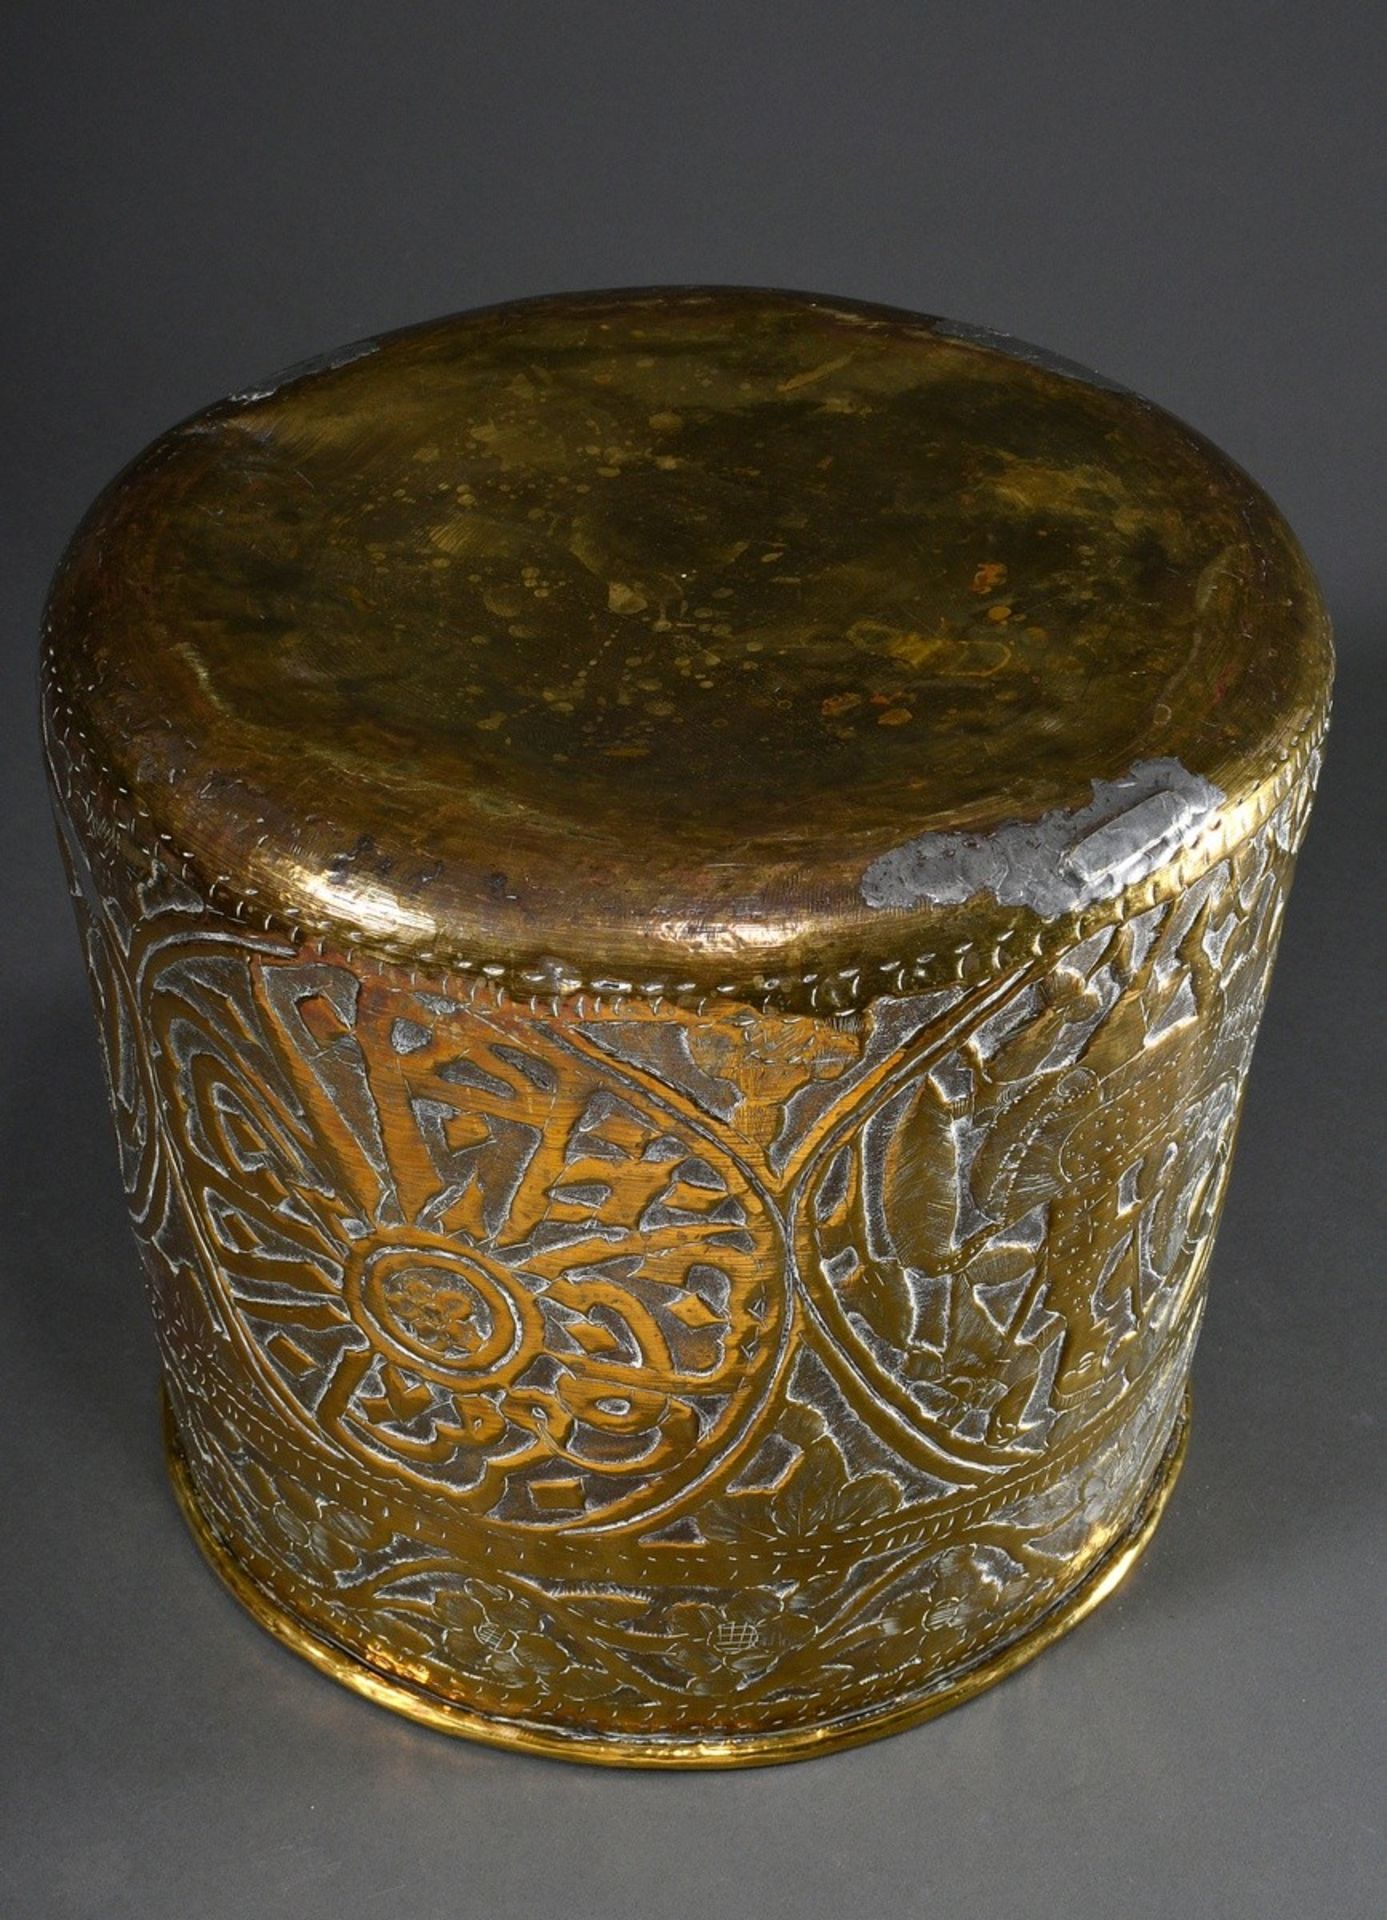 Large brass firewood bucket with chased wall "Arabic characters and figures", around 1900, h. 32cm, - Image 6 of 7